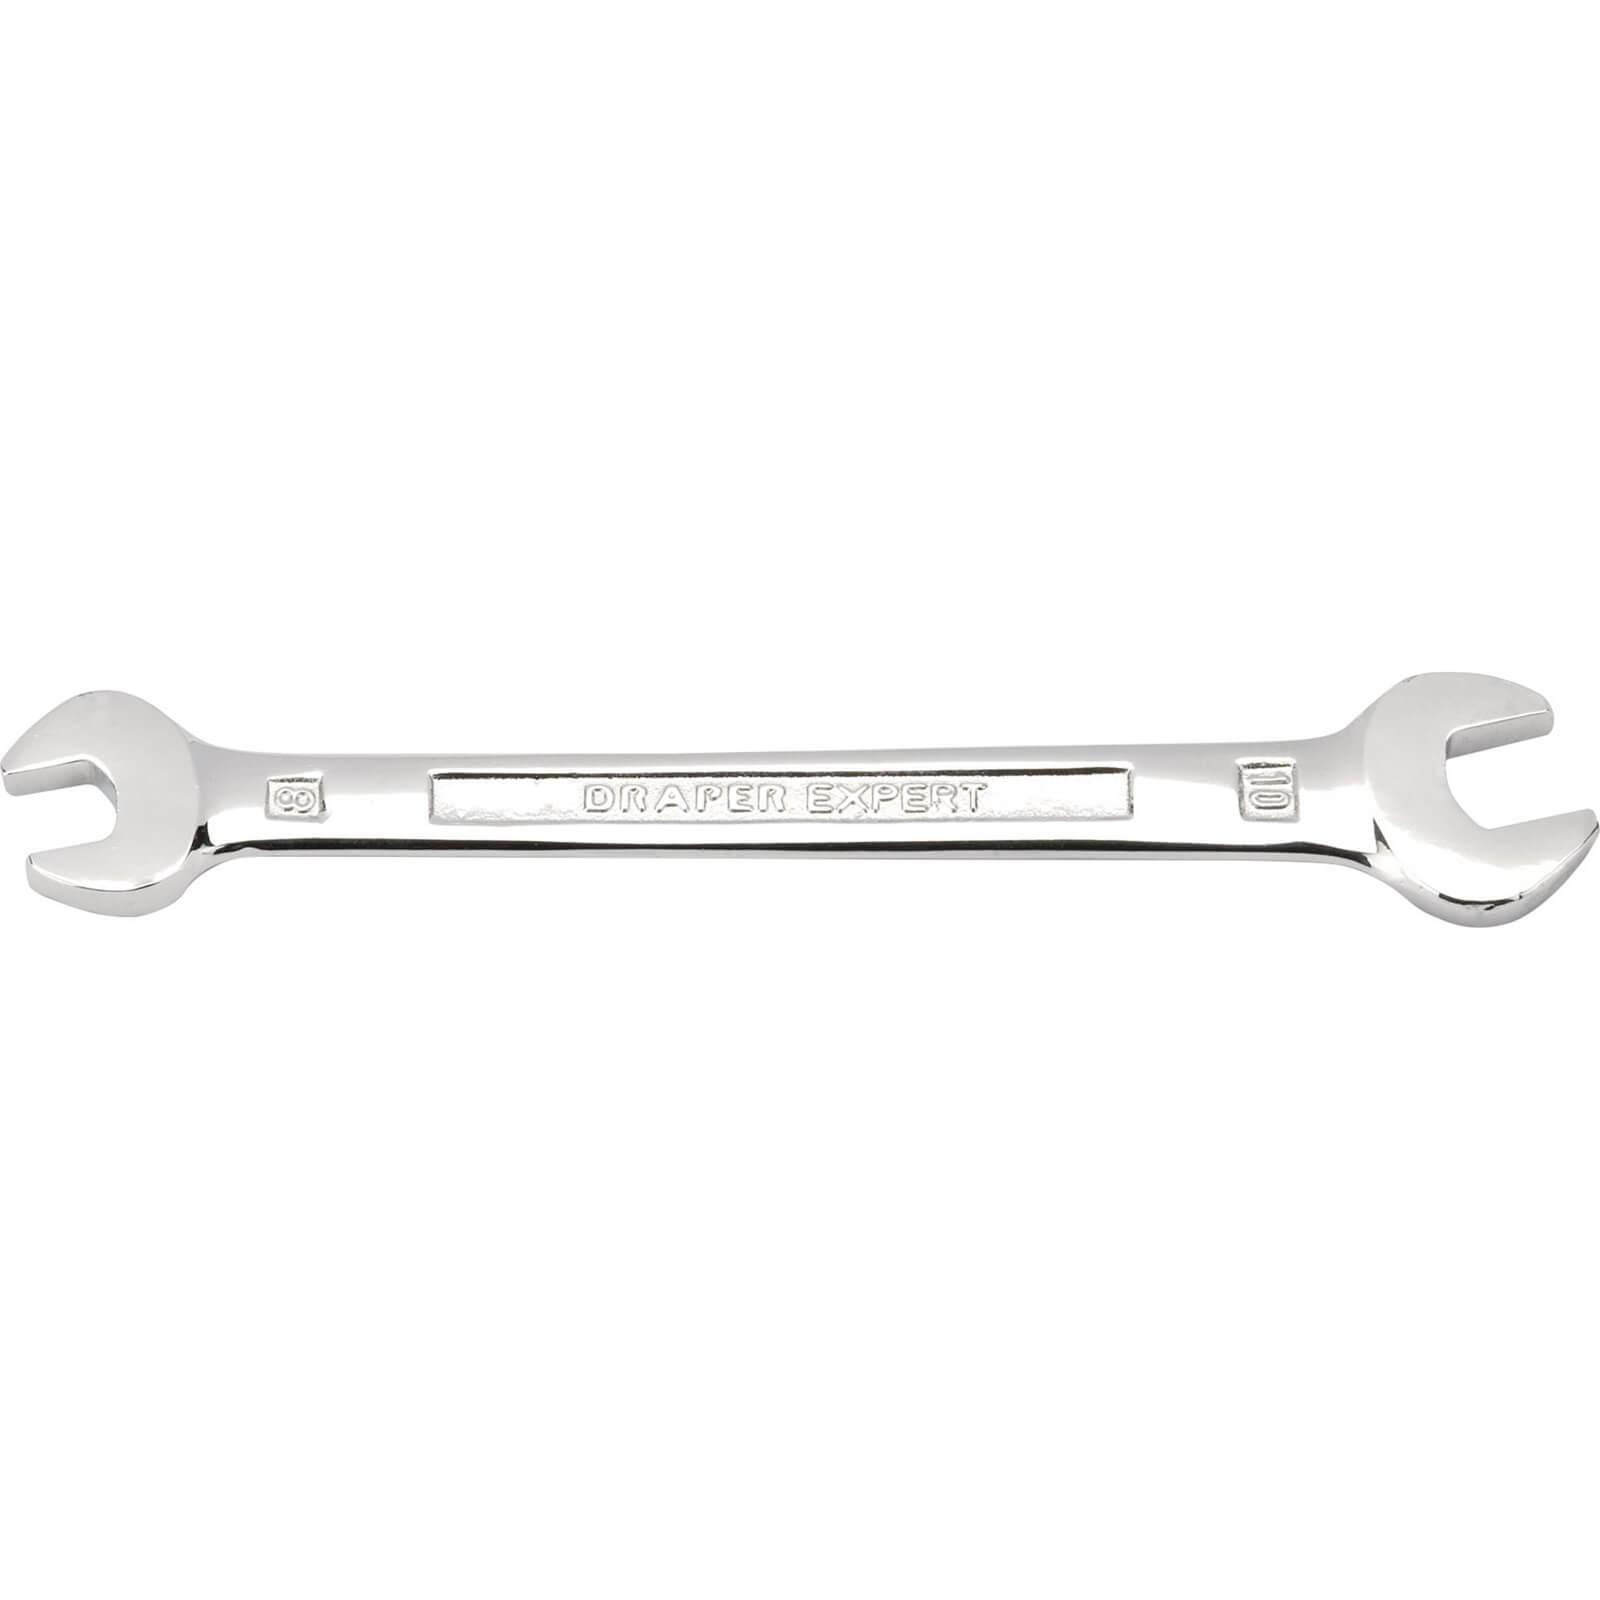 Image of Draper Expert Double Open Ended Spanner Metric 8mm x 10mm